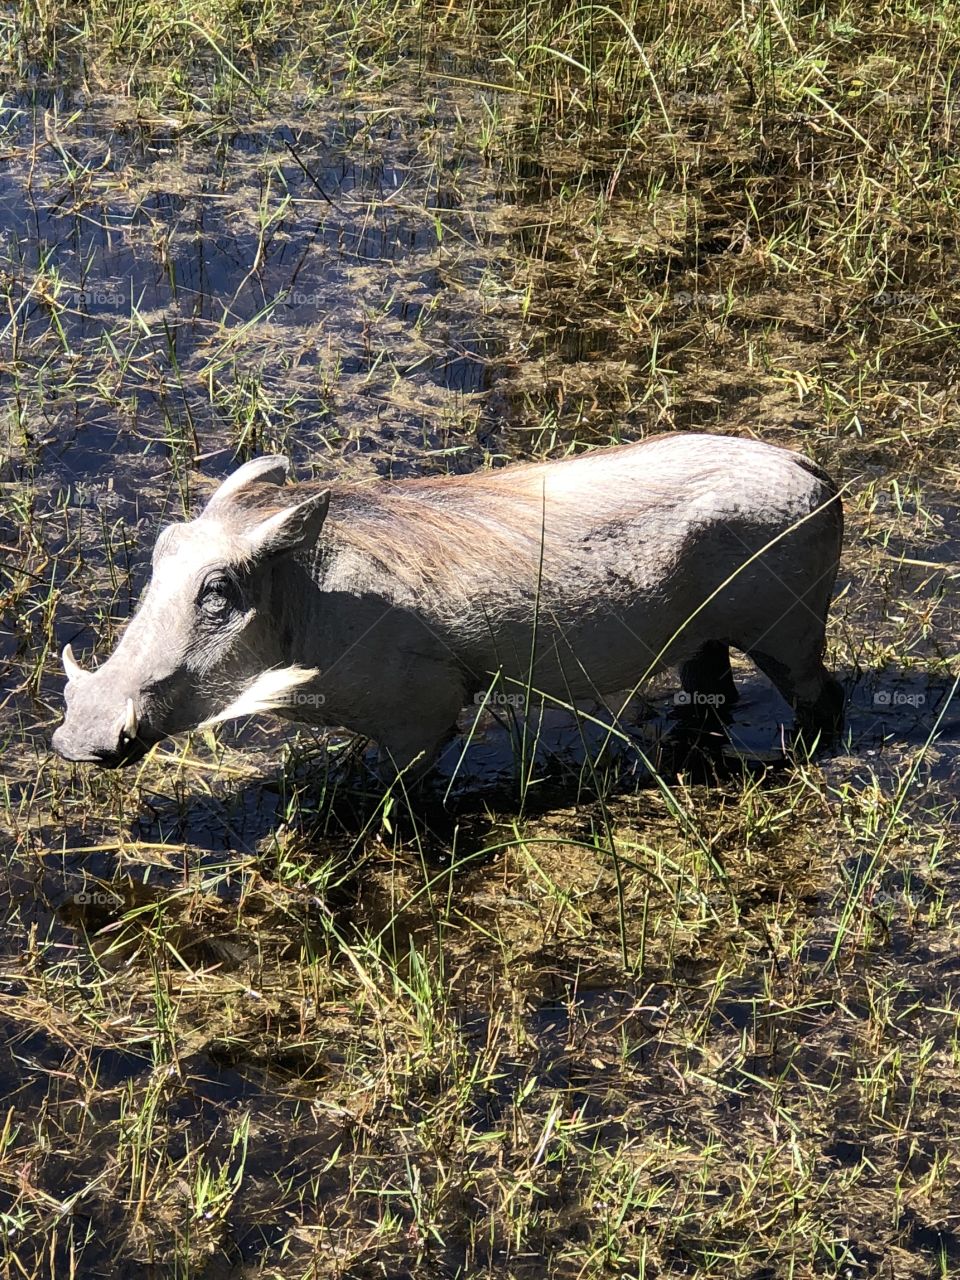 A very happy African warthog in the midday African sun